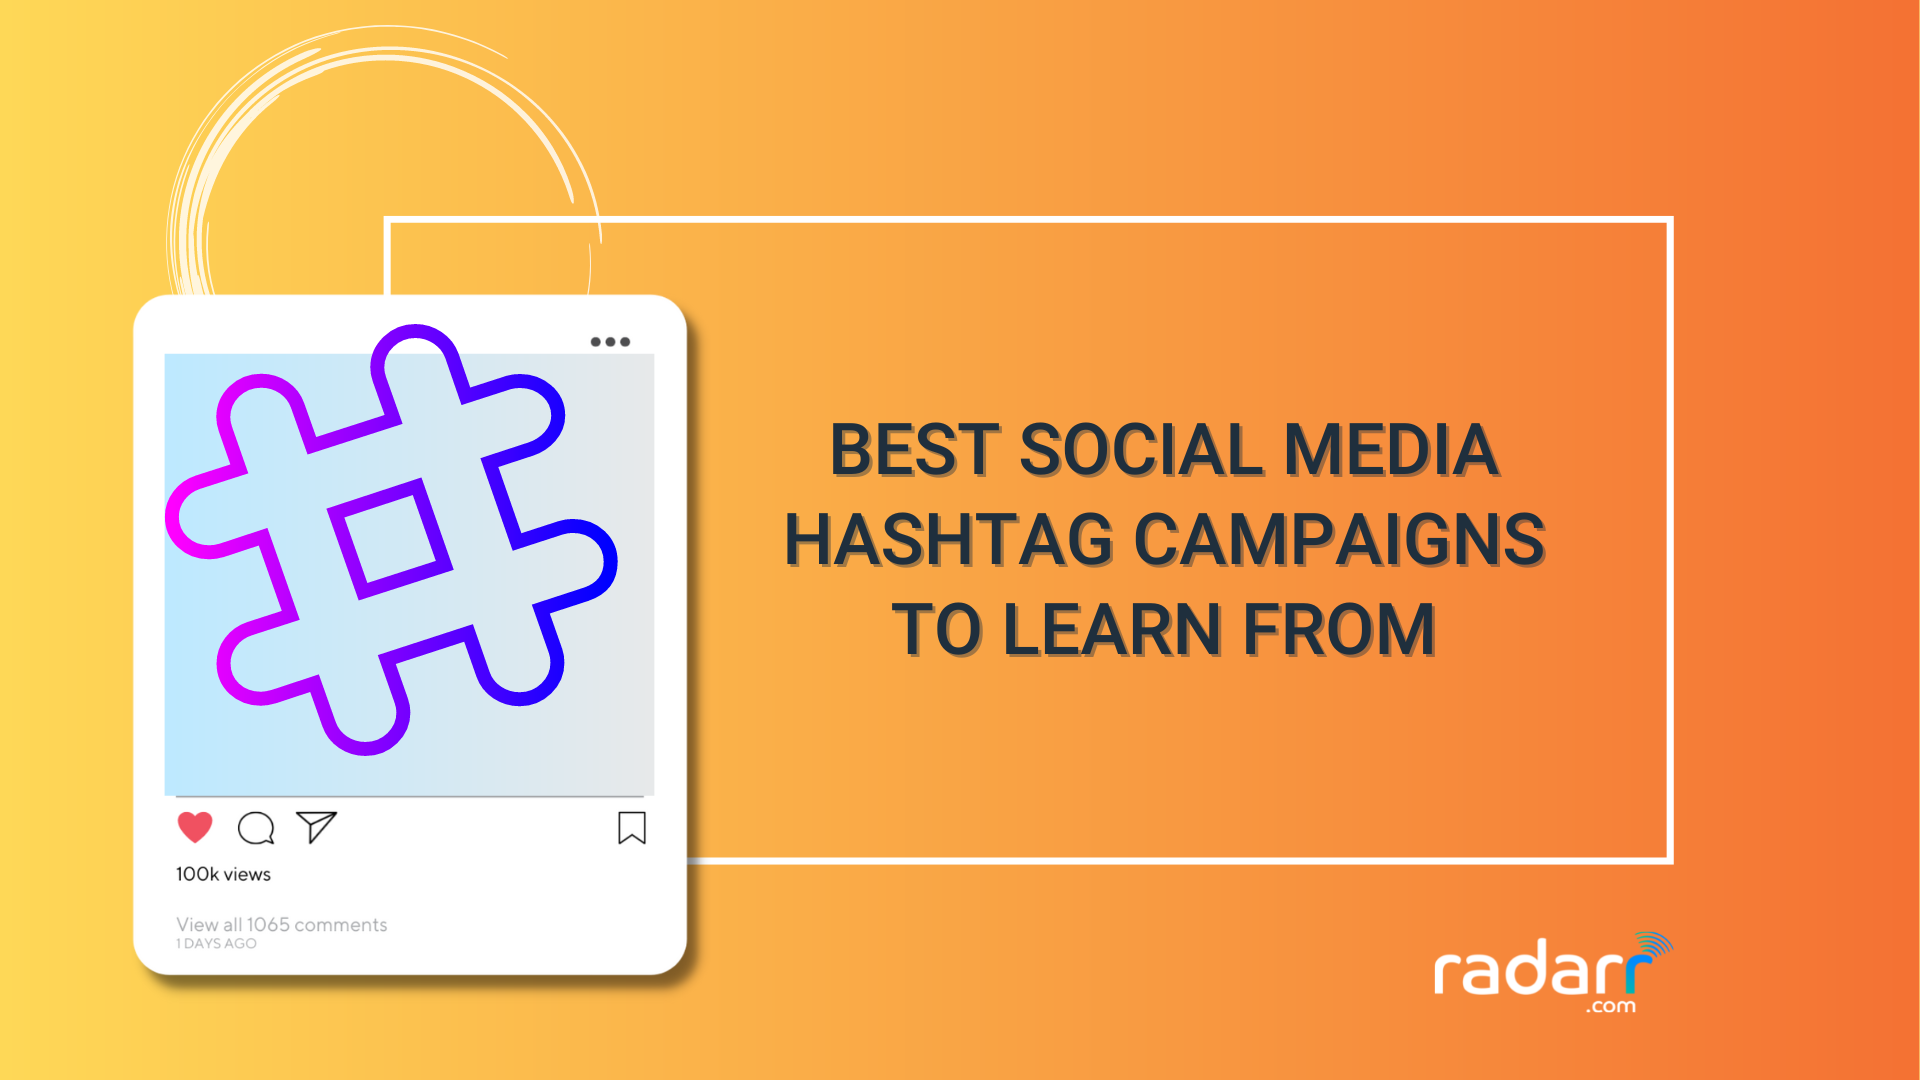 best social media hashtag campaigns to learn from